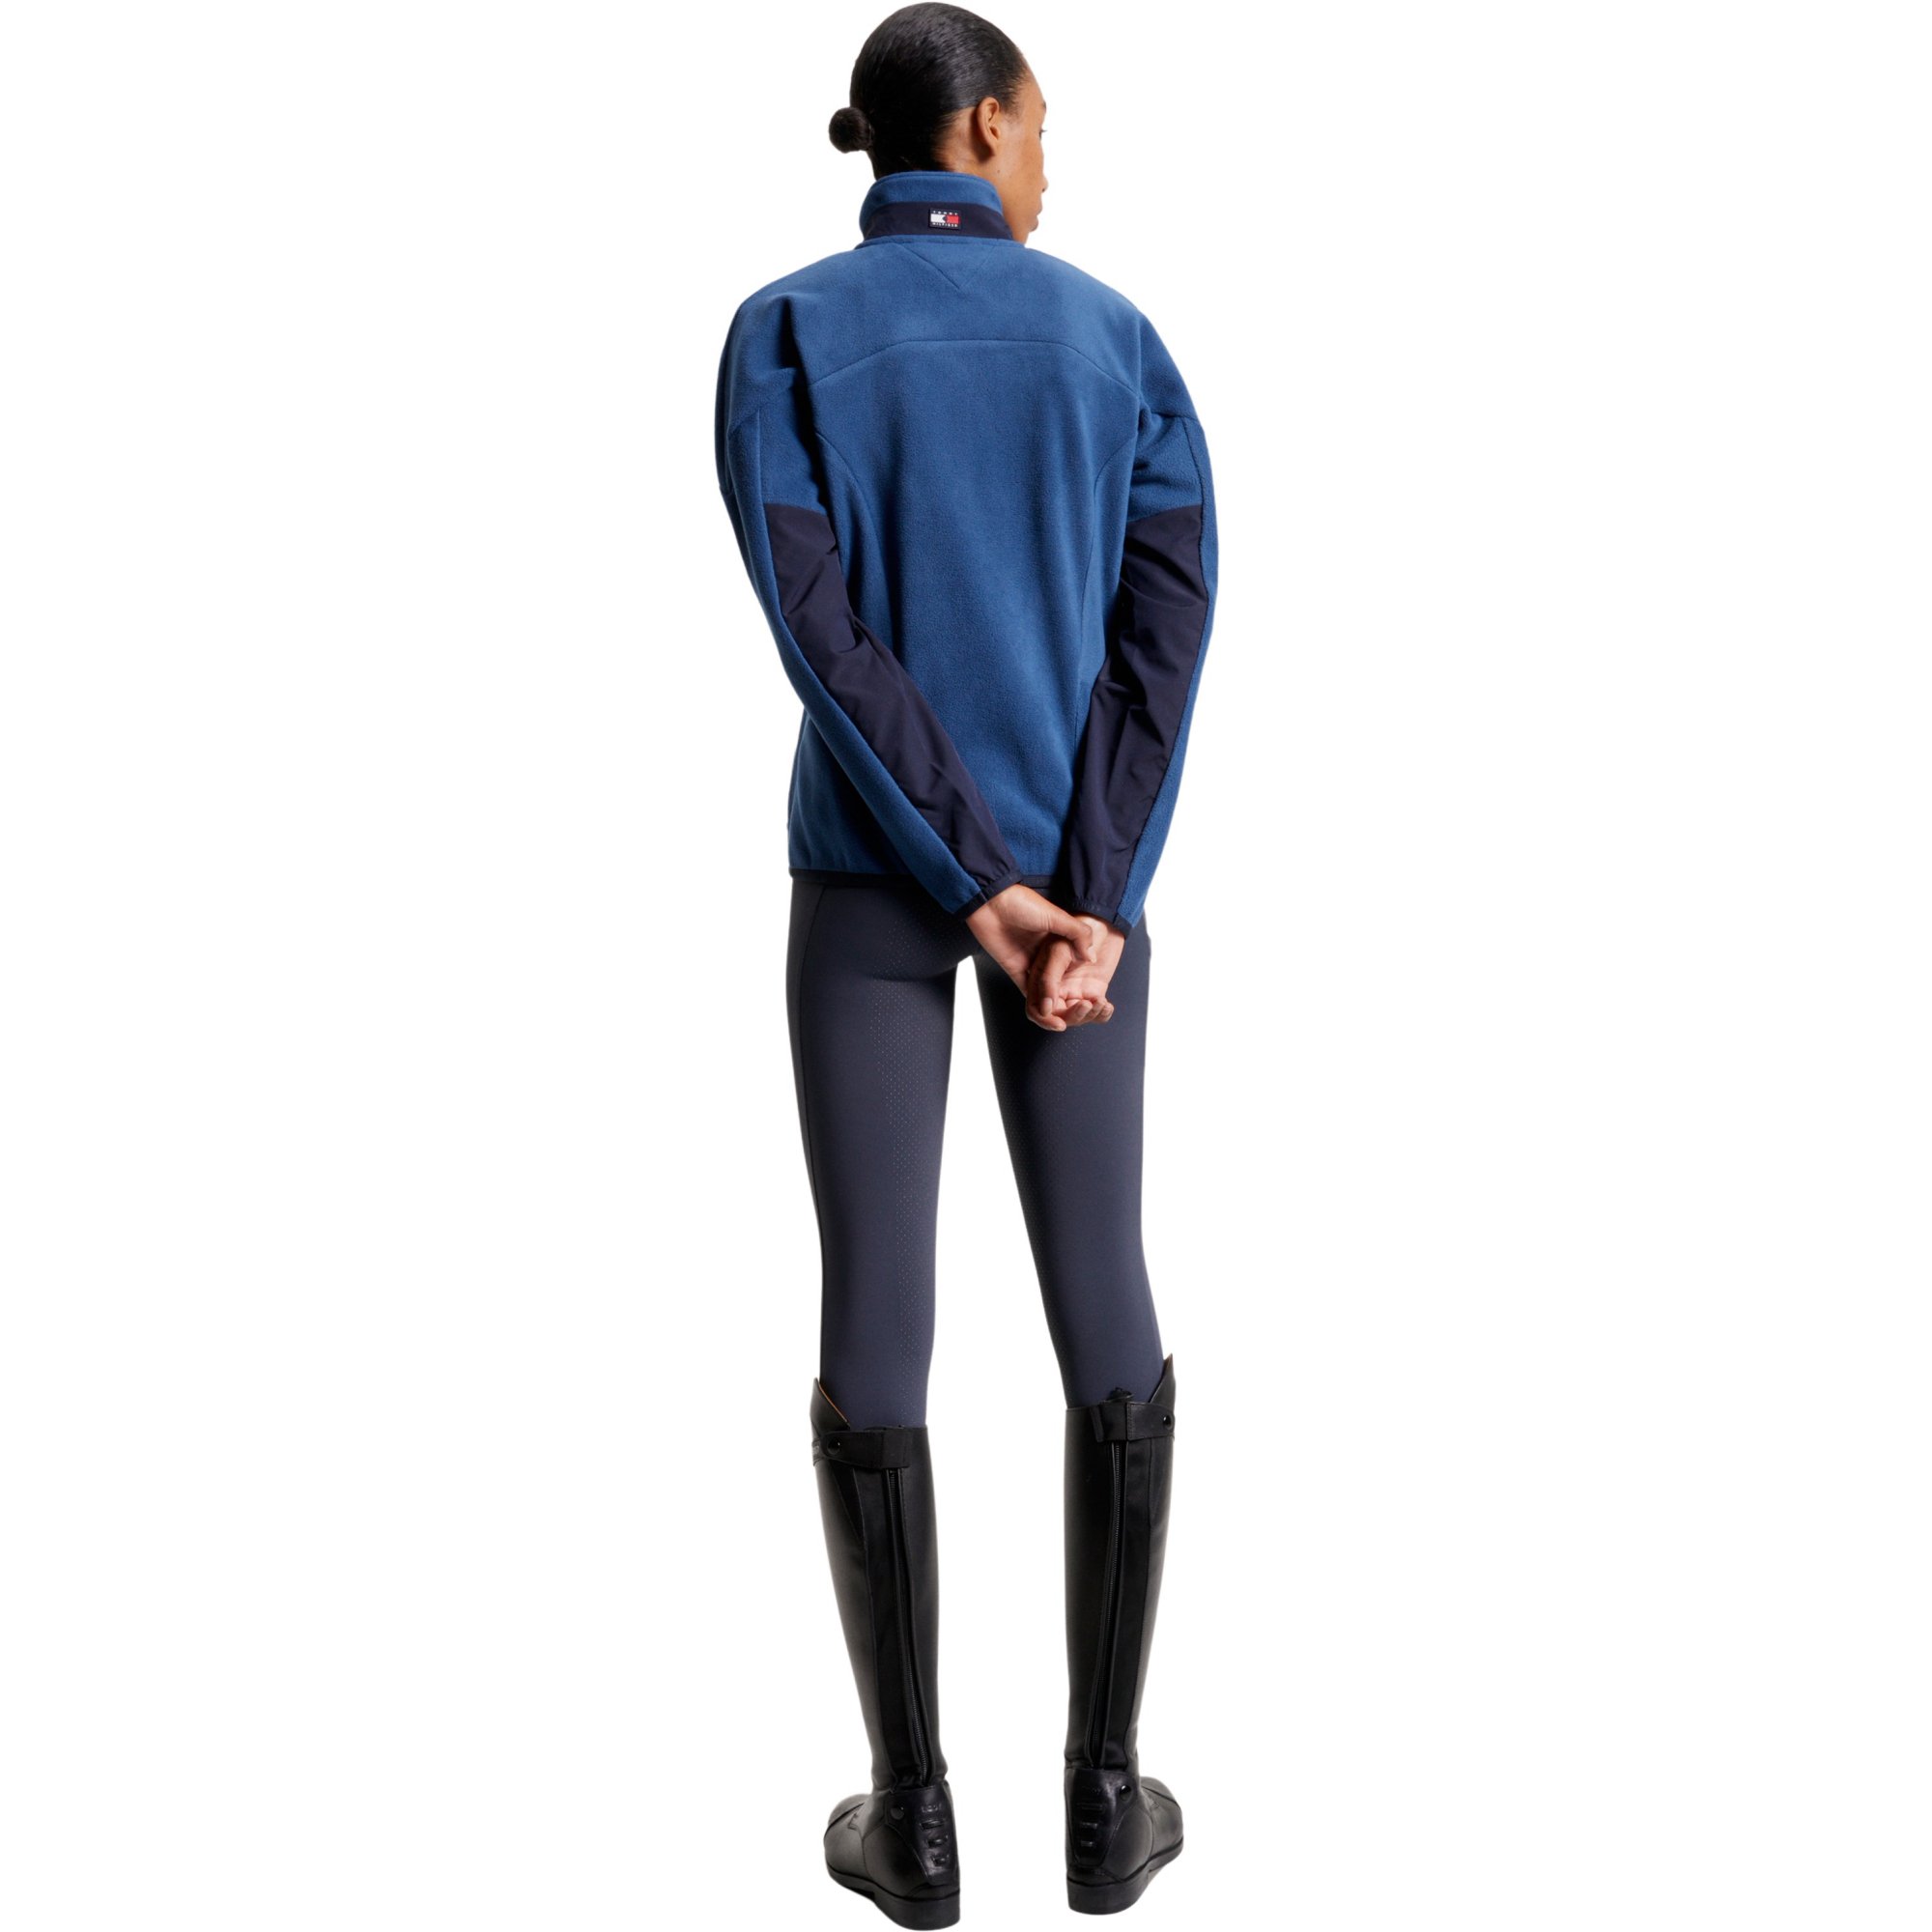 Tommy Hilfiger Equestrian Women's Thermal Riding Leggings Style FW22